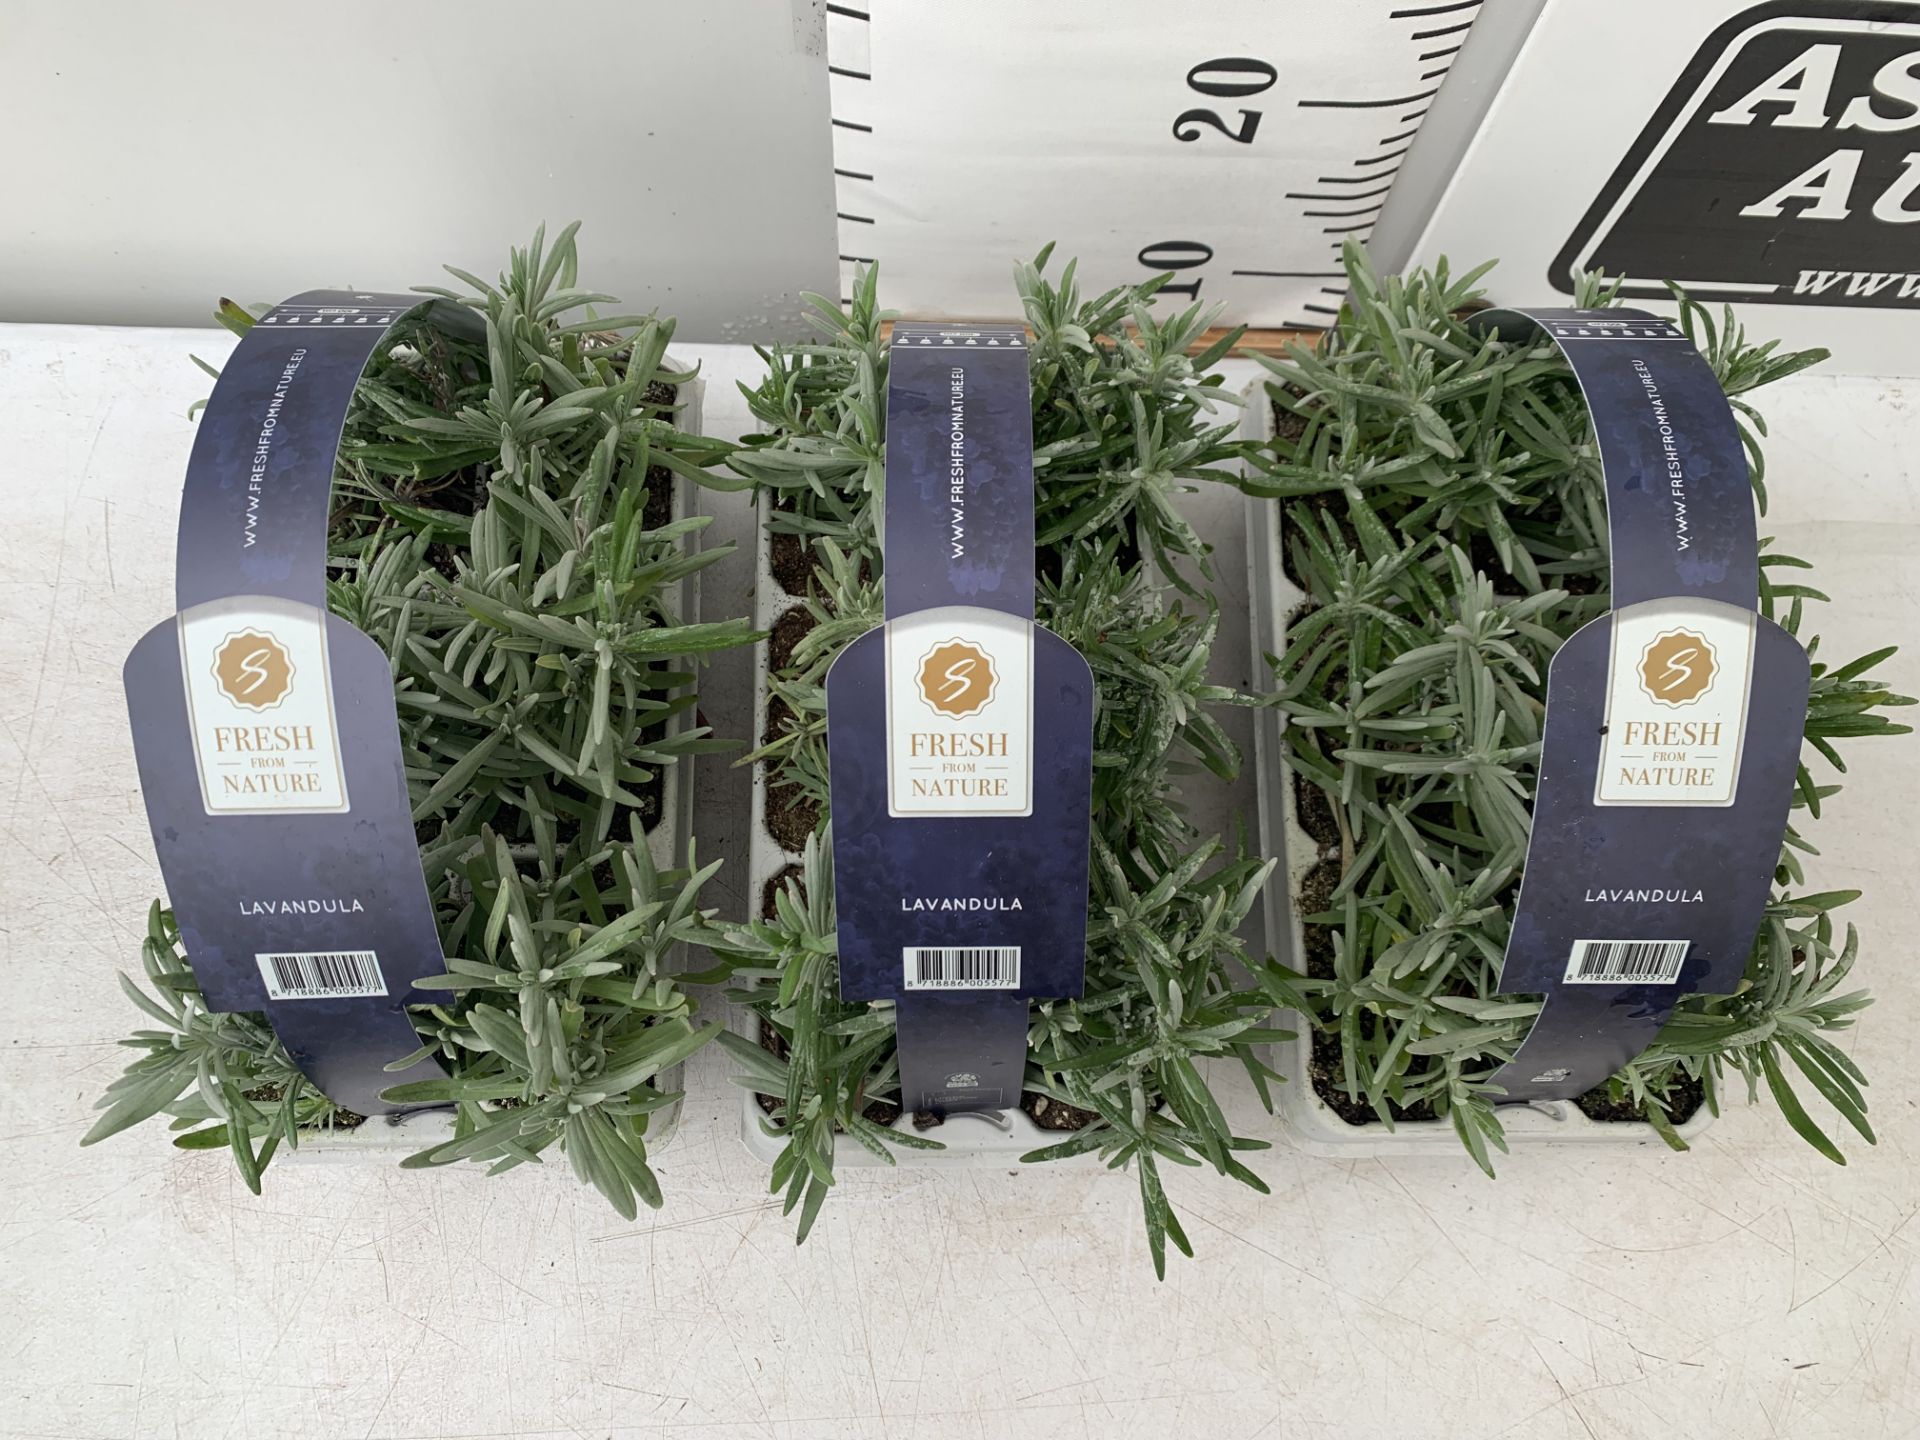 3 CARRY TRAYS OF PLUG LAVENDERS 18 PLANTS IN TOTAL PLUS VAT TO BE SOLD FOR THE THREE TRAYS - Image 3 of 6